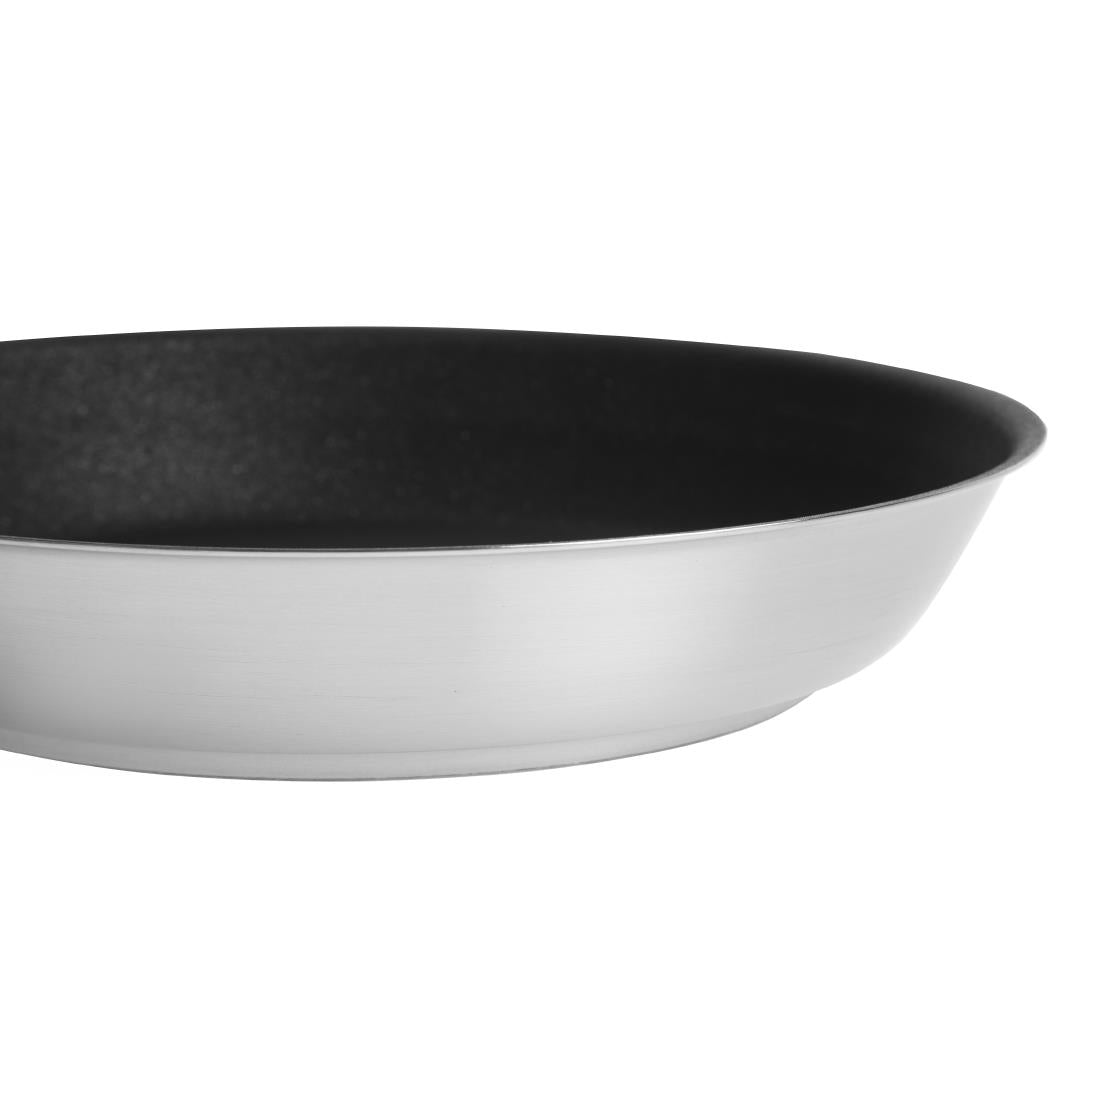 CX538 Matfer Bourgeat Tradition Pro Non-Stick Frying Pan 20cm JD Catering Equipment Solutions Ltd